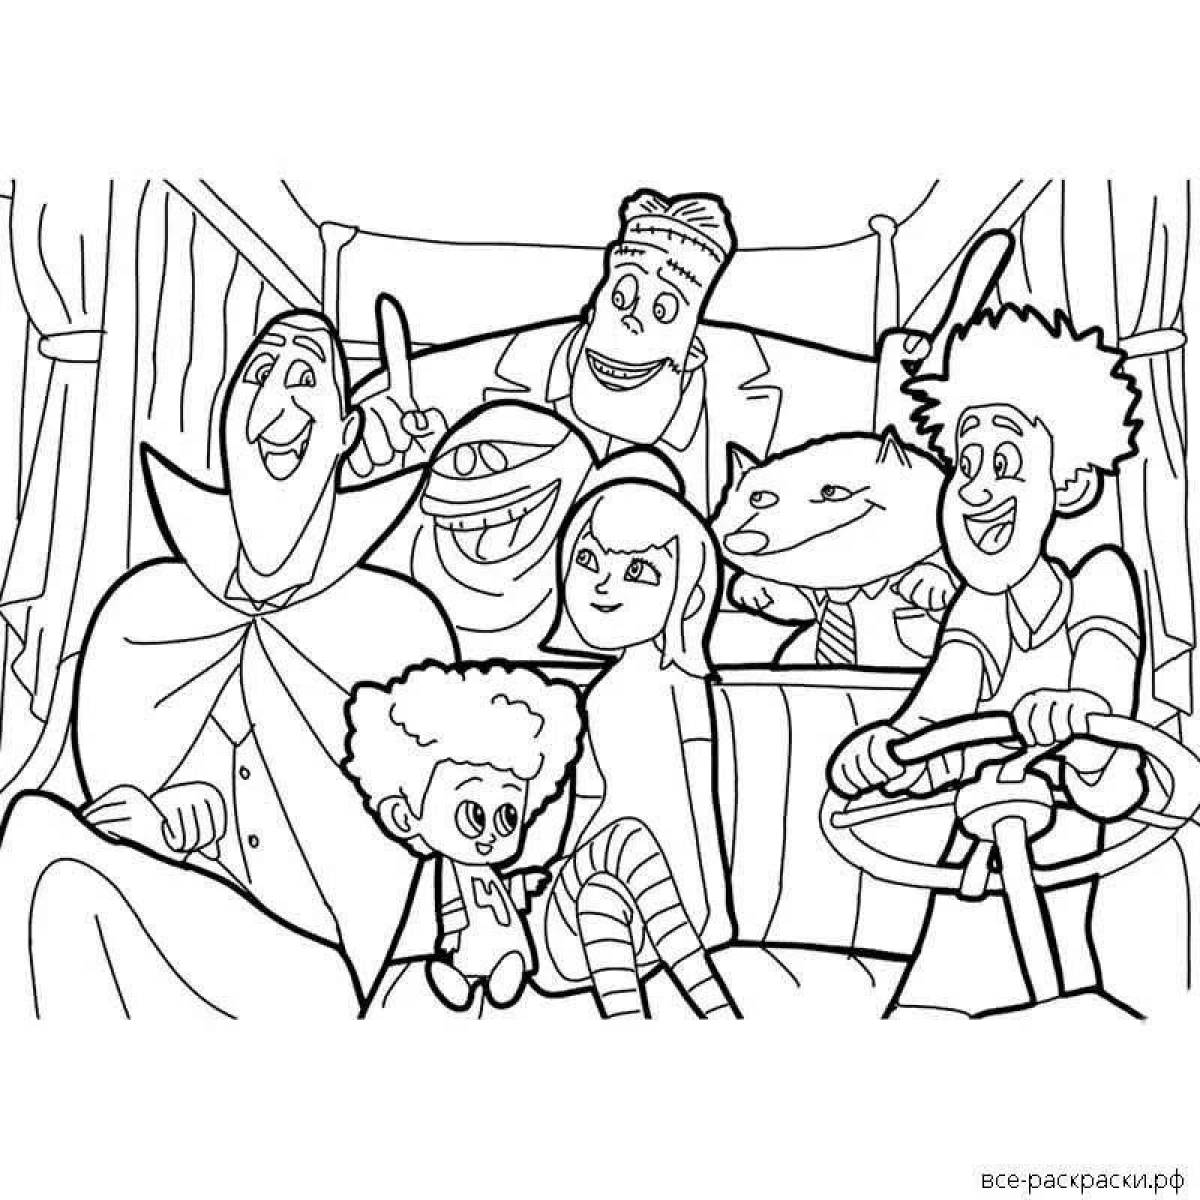 Monsters on vacation playful coloring page